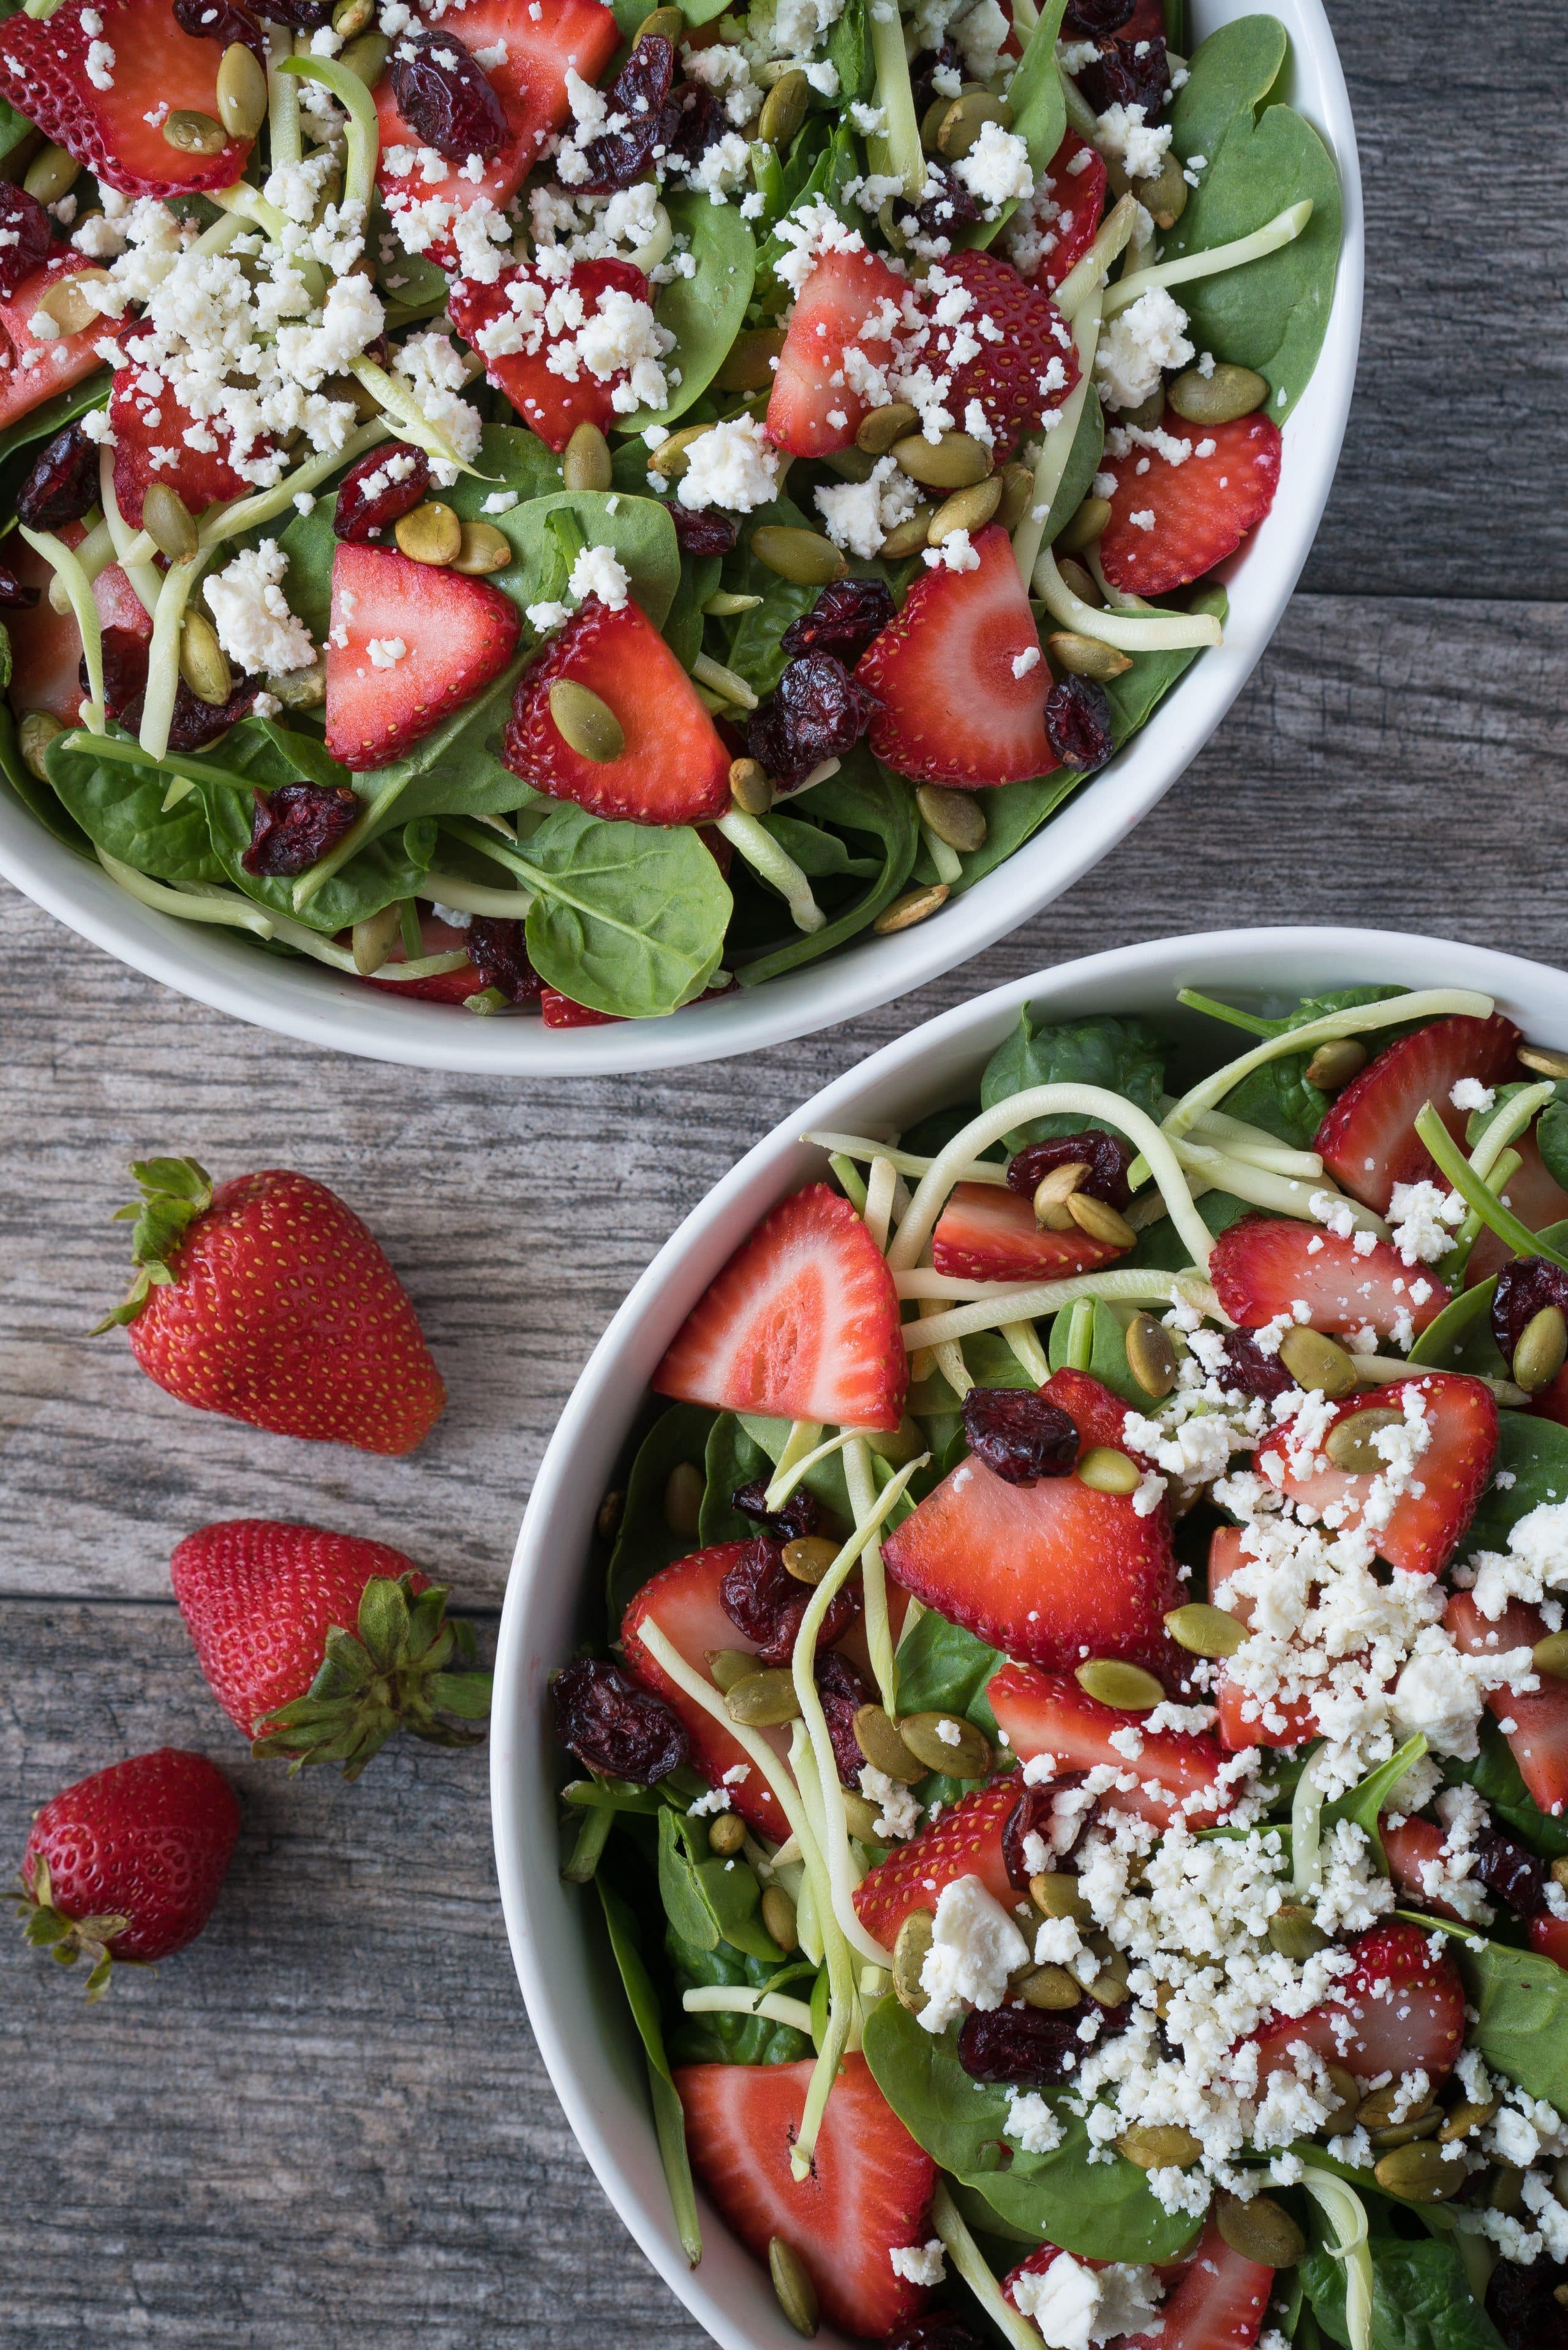 Strawberry Pepita Salad – Healthy recipe for a Strawberry Pepita Salad, with a tangy homemade Maple Vinaigrette. Using baby spinach and broccoli slaw topped with honey goat cheese crumbles, toasted pepitas, fresh sliced strawberries, and sweet dried cranberries. All ready in under 15 minutes! ♥ | freeyourfork.com